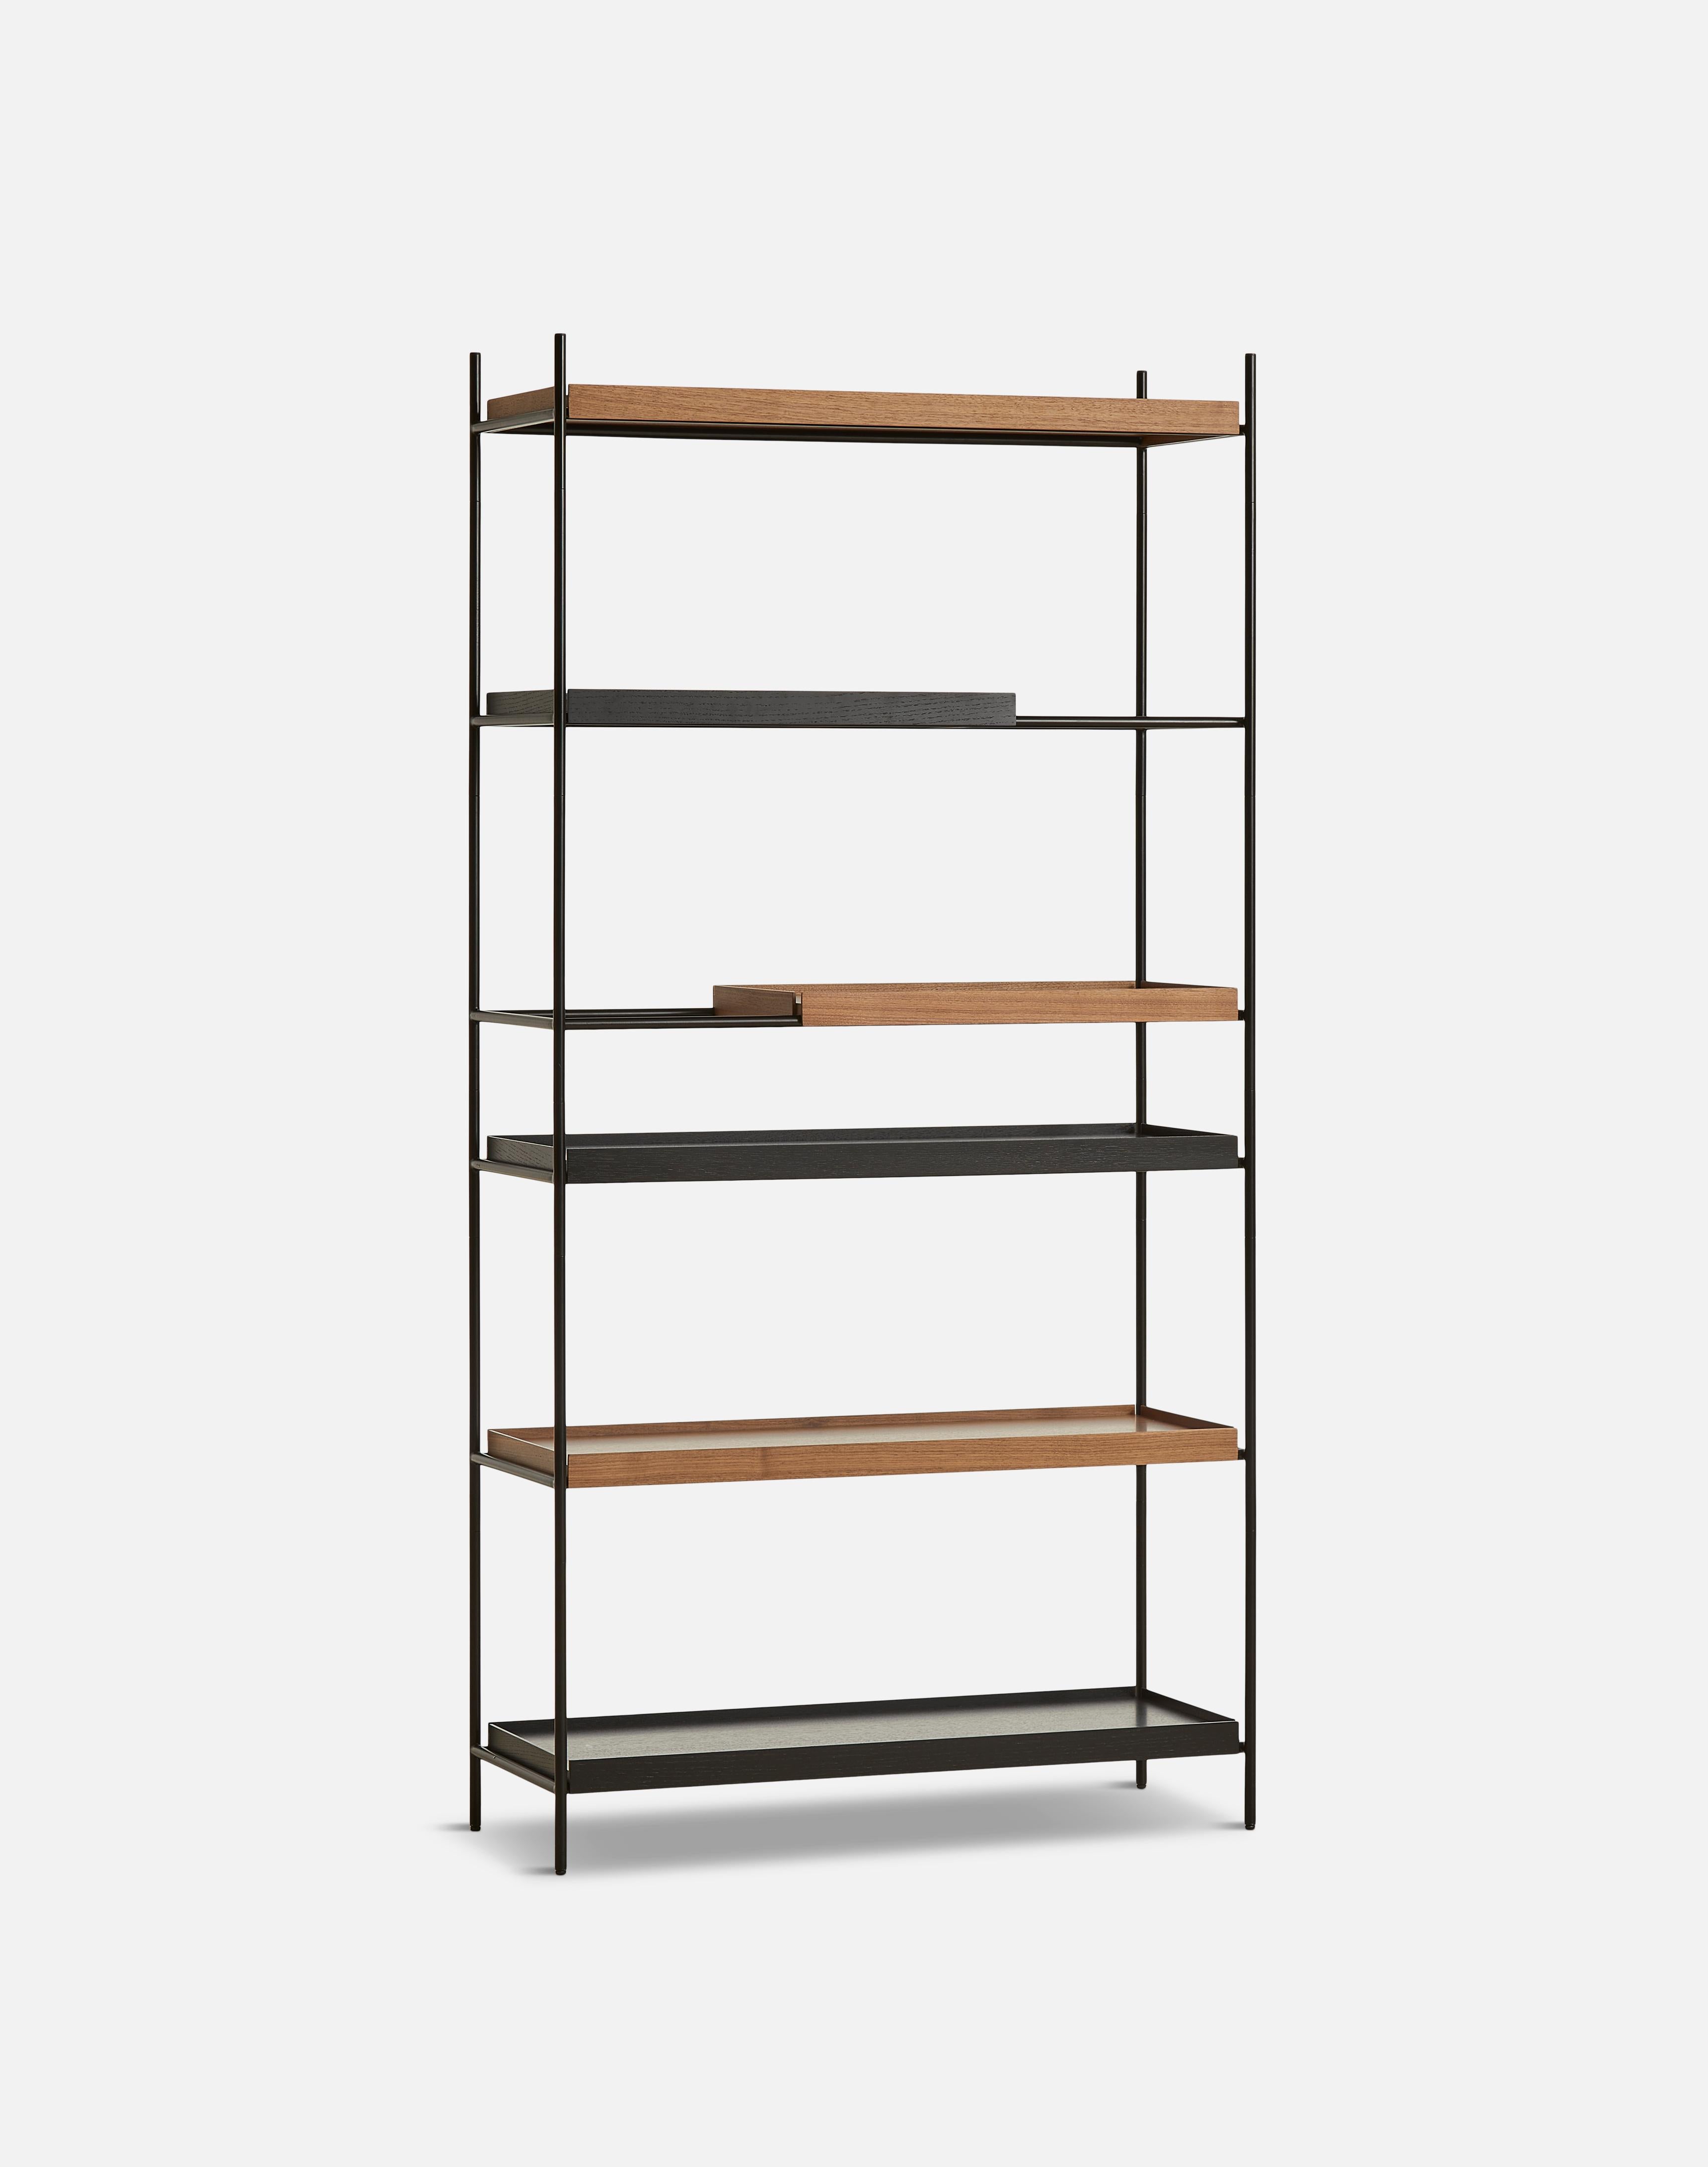 High walnut and black tray shelf I by Hanne Willmann
Materials: Metal, walnut.
Dimensions: D 40 x W 100 x H 201 cm
Also available in different tray conbinations and 2 sizes: H81, H 201 cm.

Hanne Willmann is a dynamic German designer with her